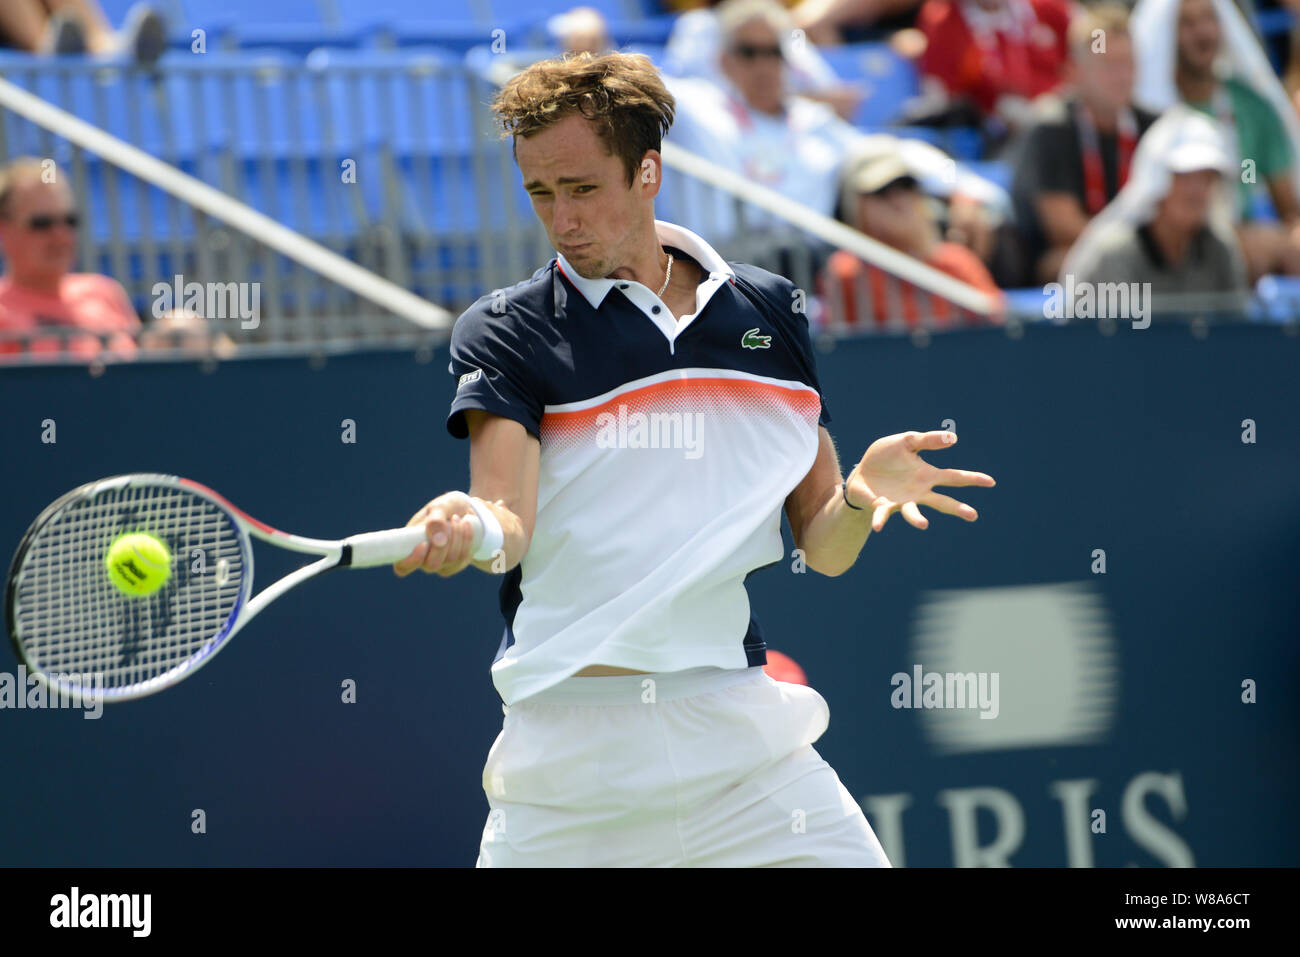 Montreal, Quebec, Canada. 8th Aug, 2019. DANILL MEDVEDEV of Russia in his  third round match v C. Garin in the Rogers Cup tennis tournament in Montreal  Canada. Credit: Christopher Levy/ZUMA Wire/Alamy Live